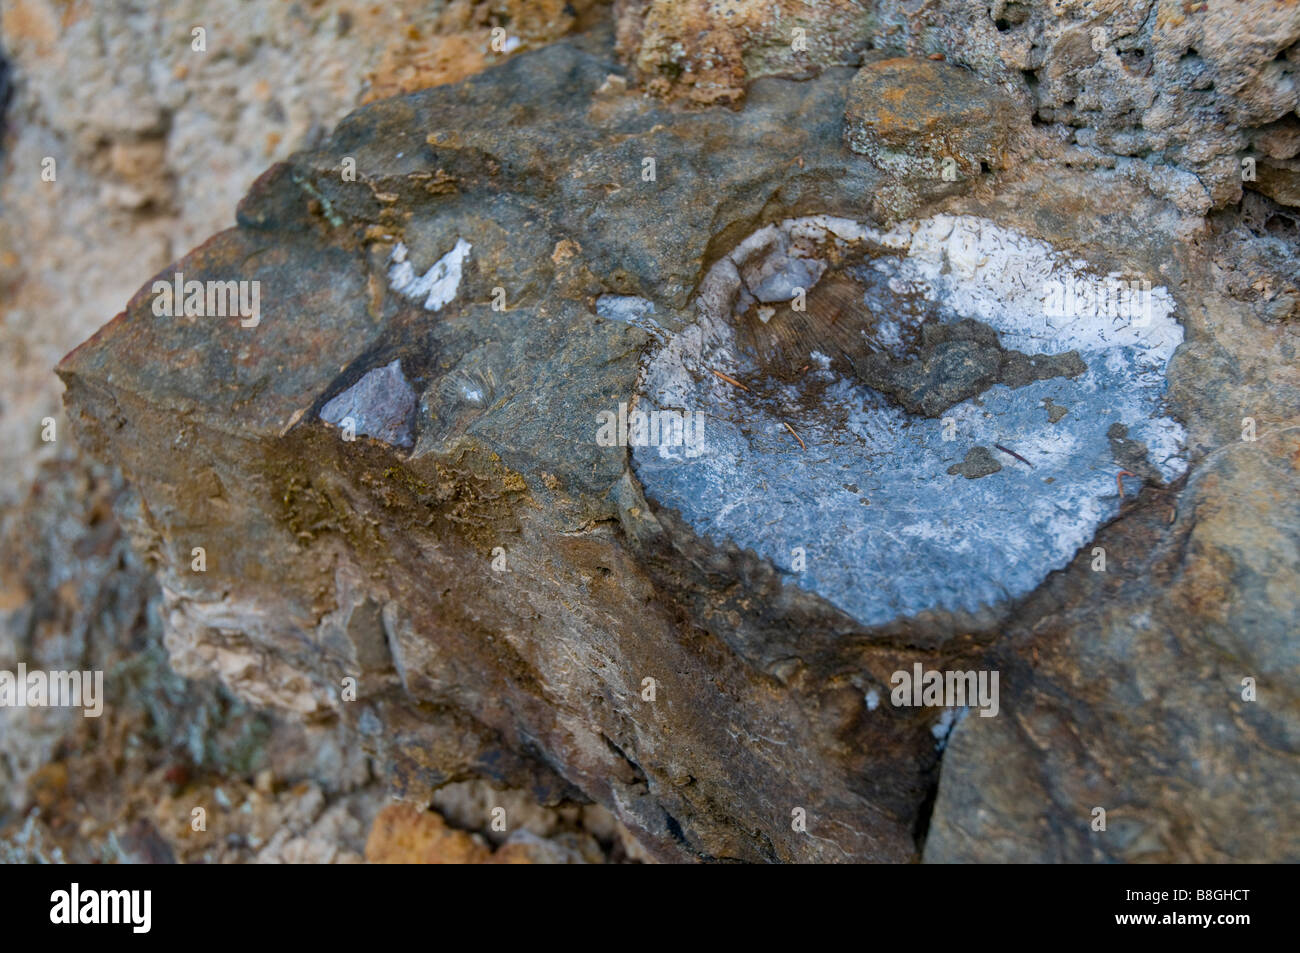 A fossilised oyster shell in rocks 600 metres above sea level on Mount Wellington in Tasmanian Australia Stock Photo